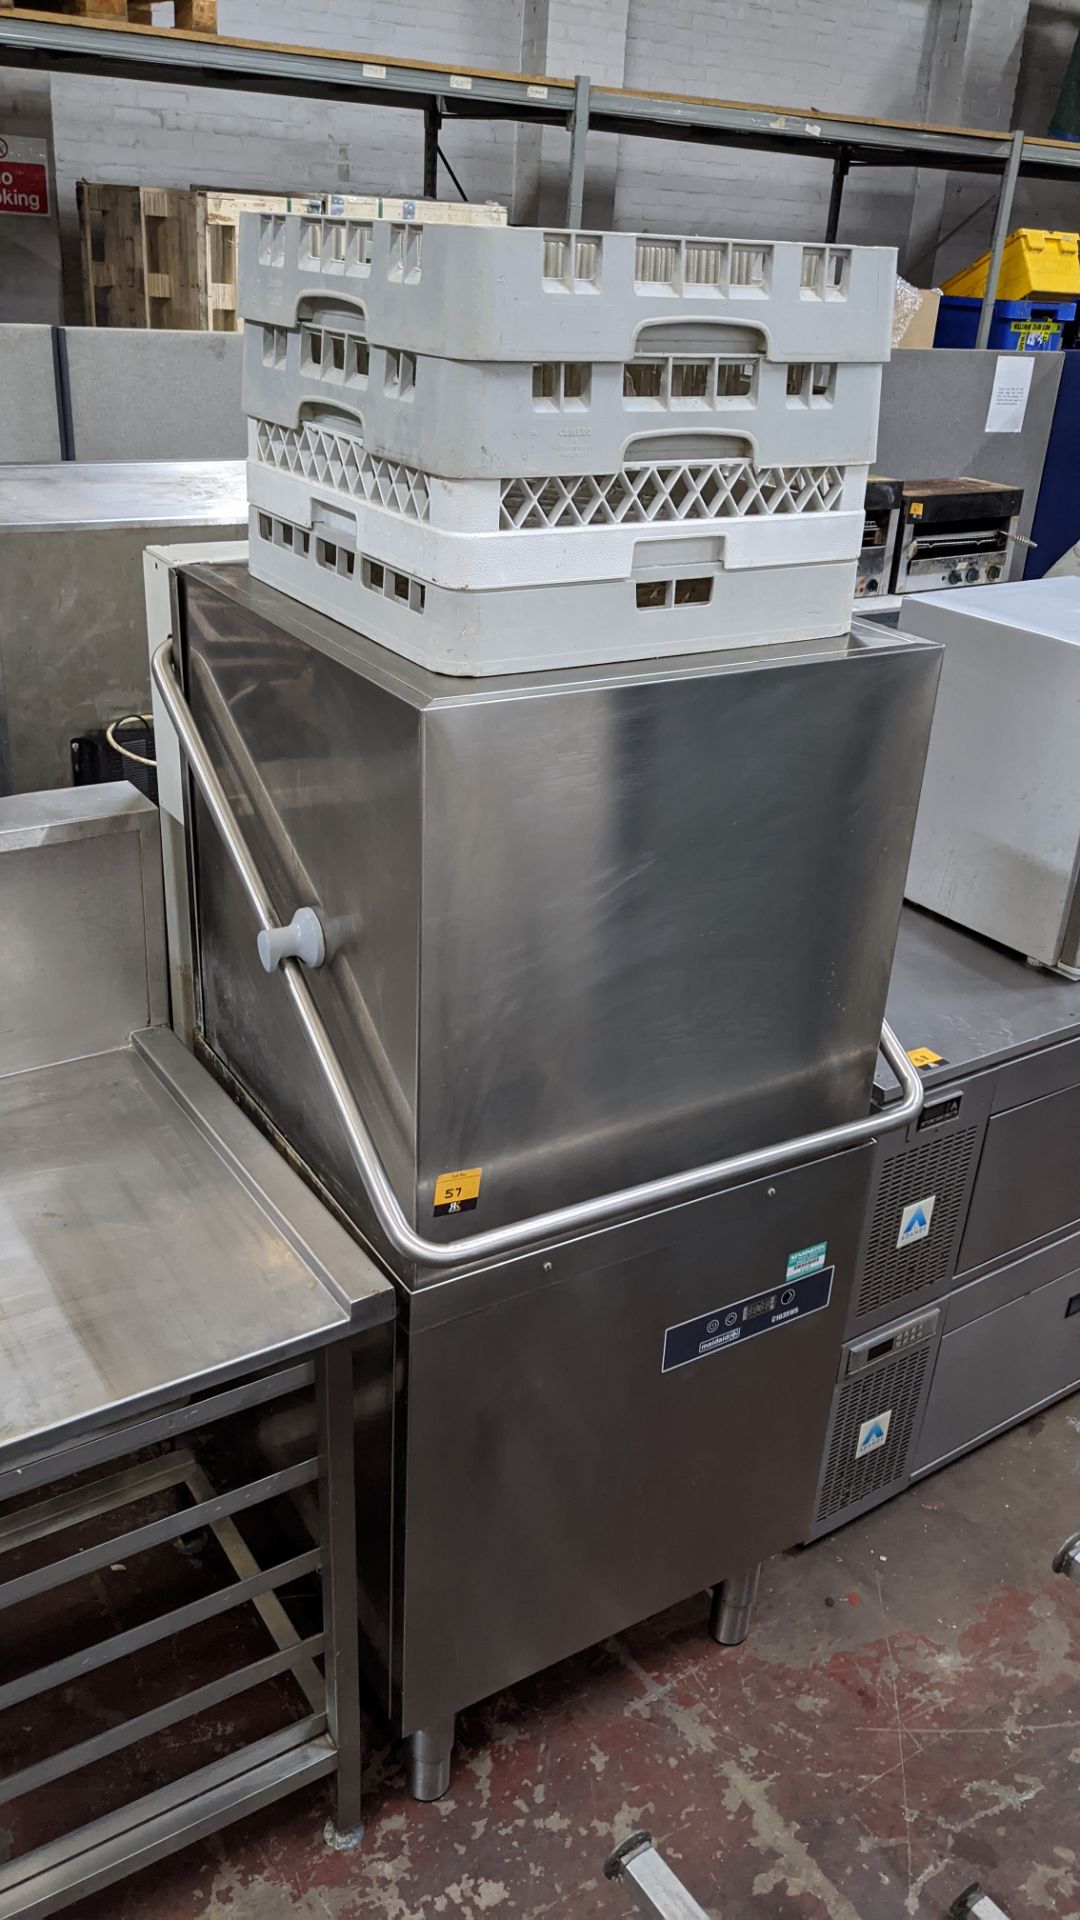 Maidaid model C1035WS commercial overhead pass through dishwasher including stainless steel side tab